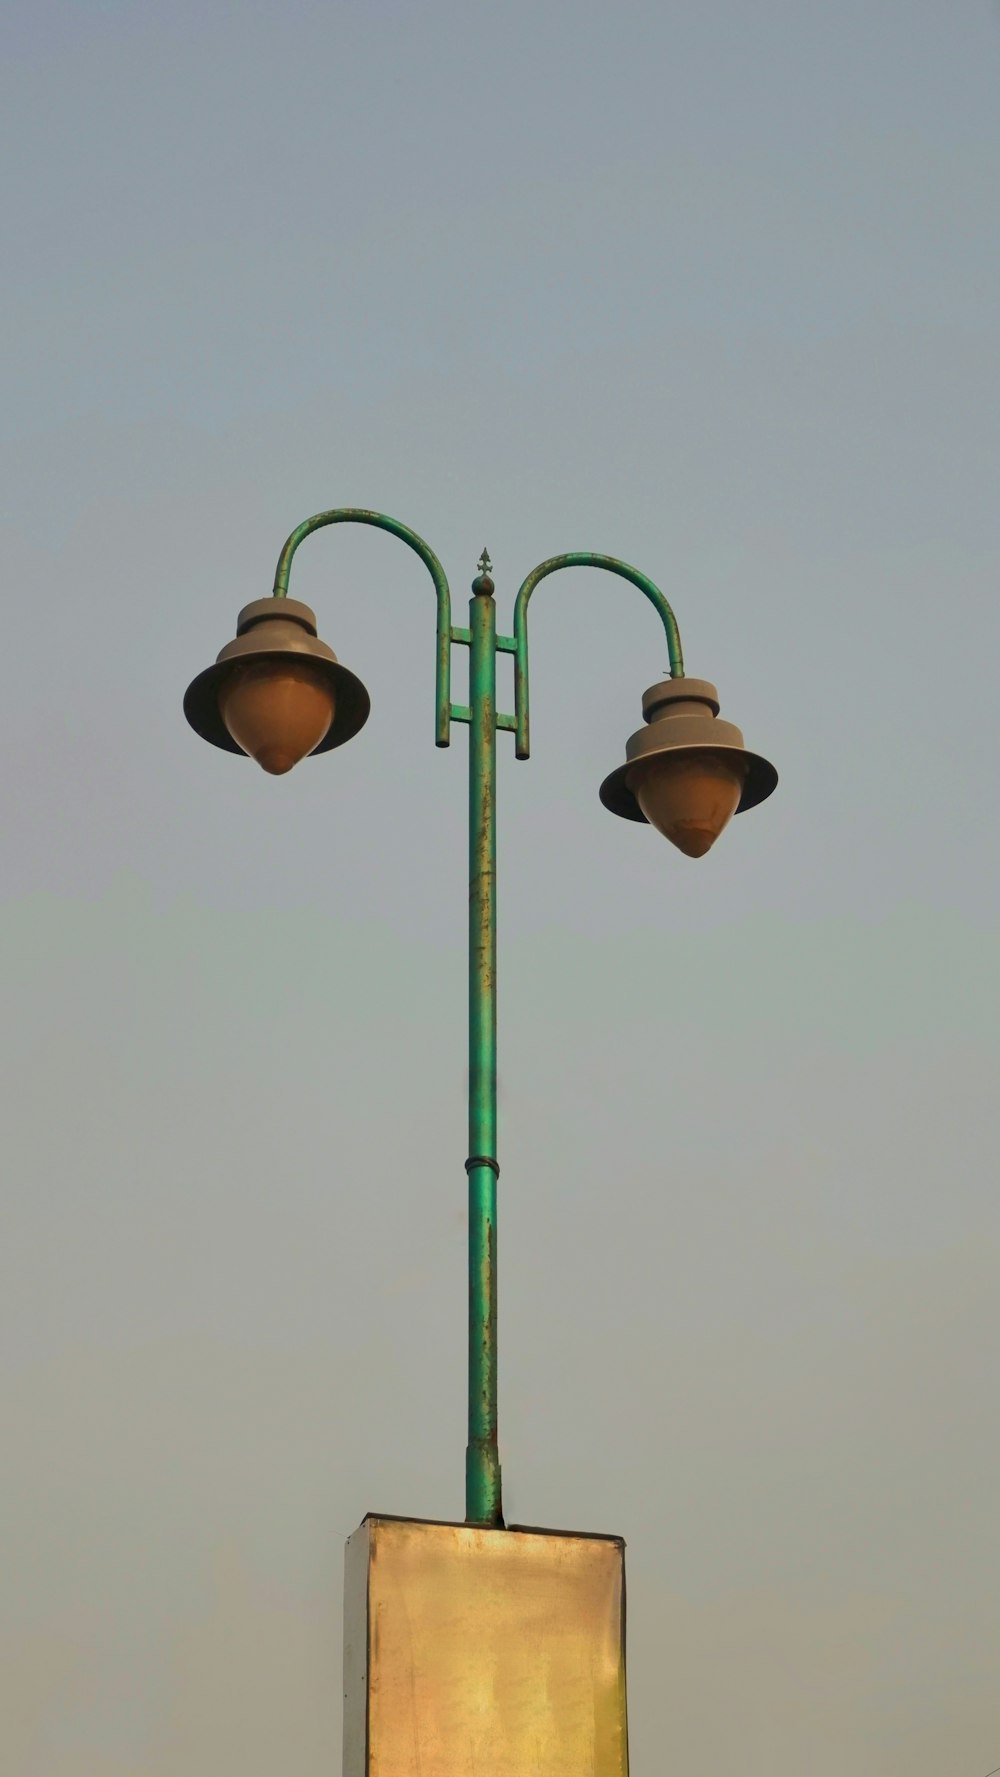 a light post with a couple of light bulbs on top